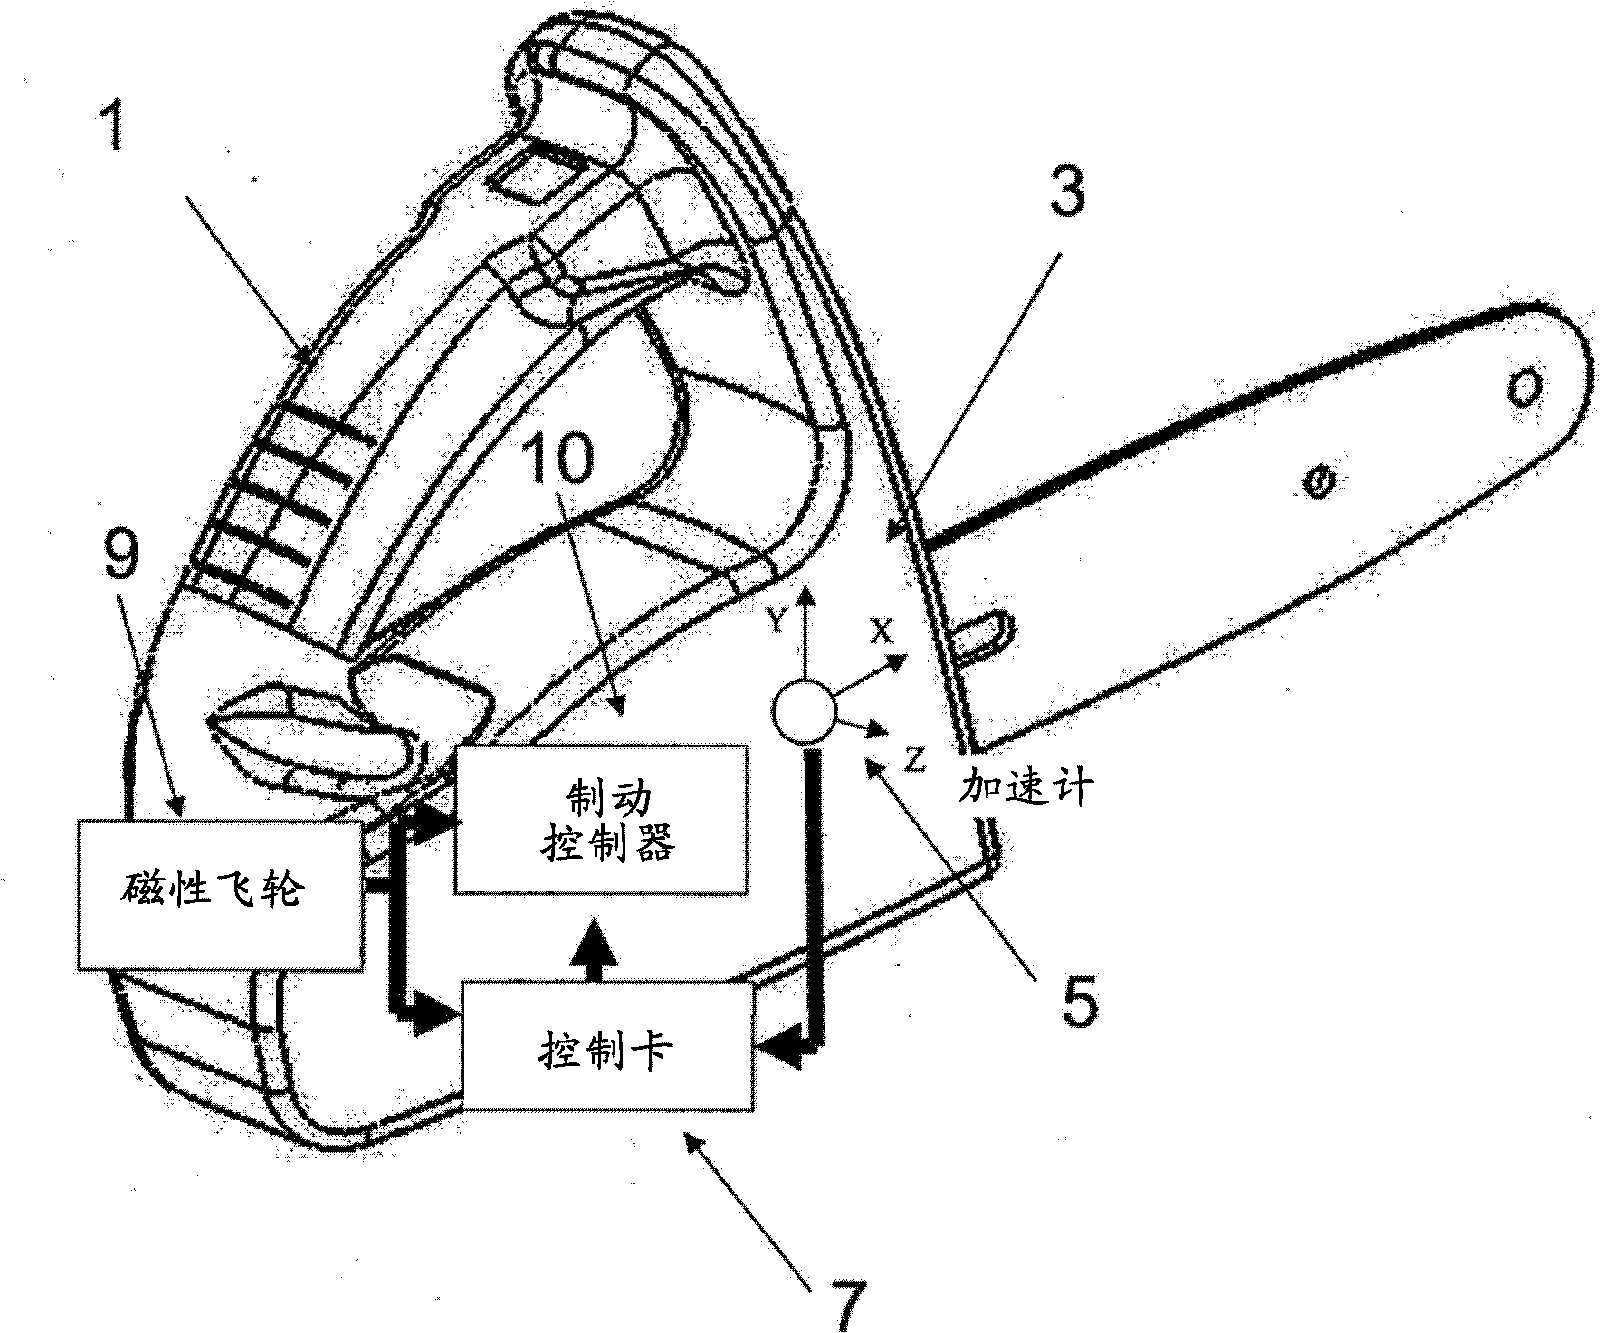 Safety device for portable tools with a heat engine, capable of stopping the operation thereof after sudden, violent movements